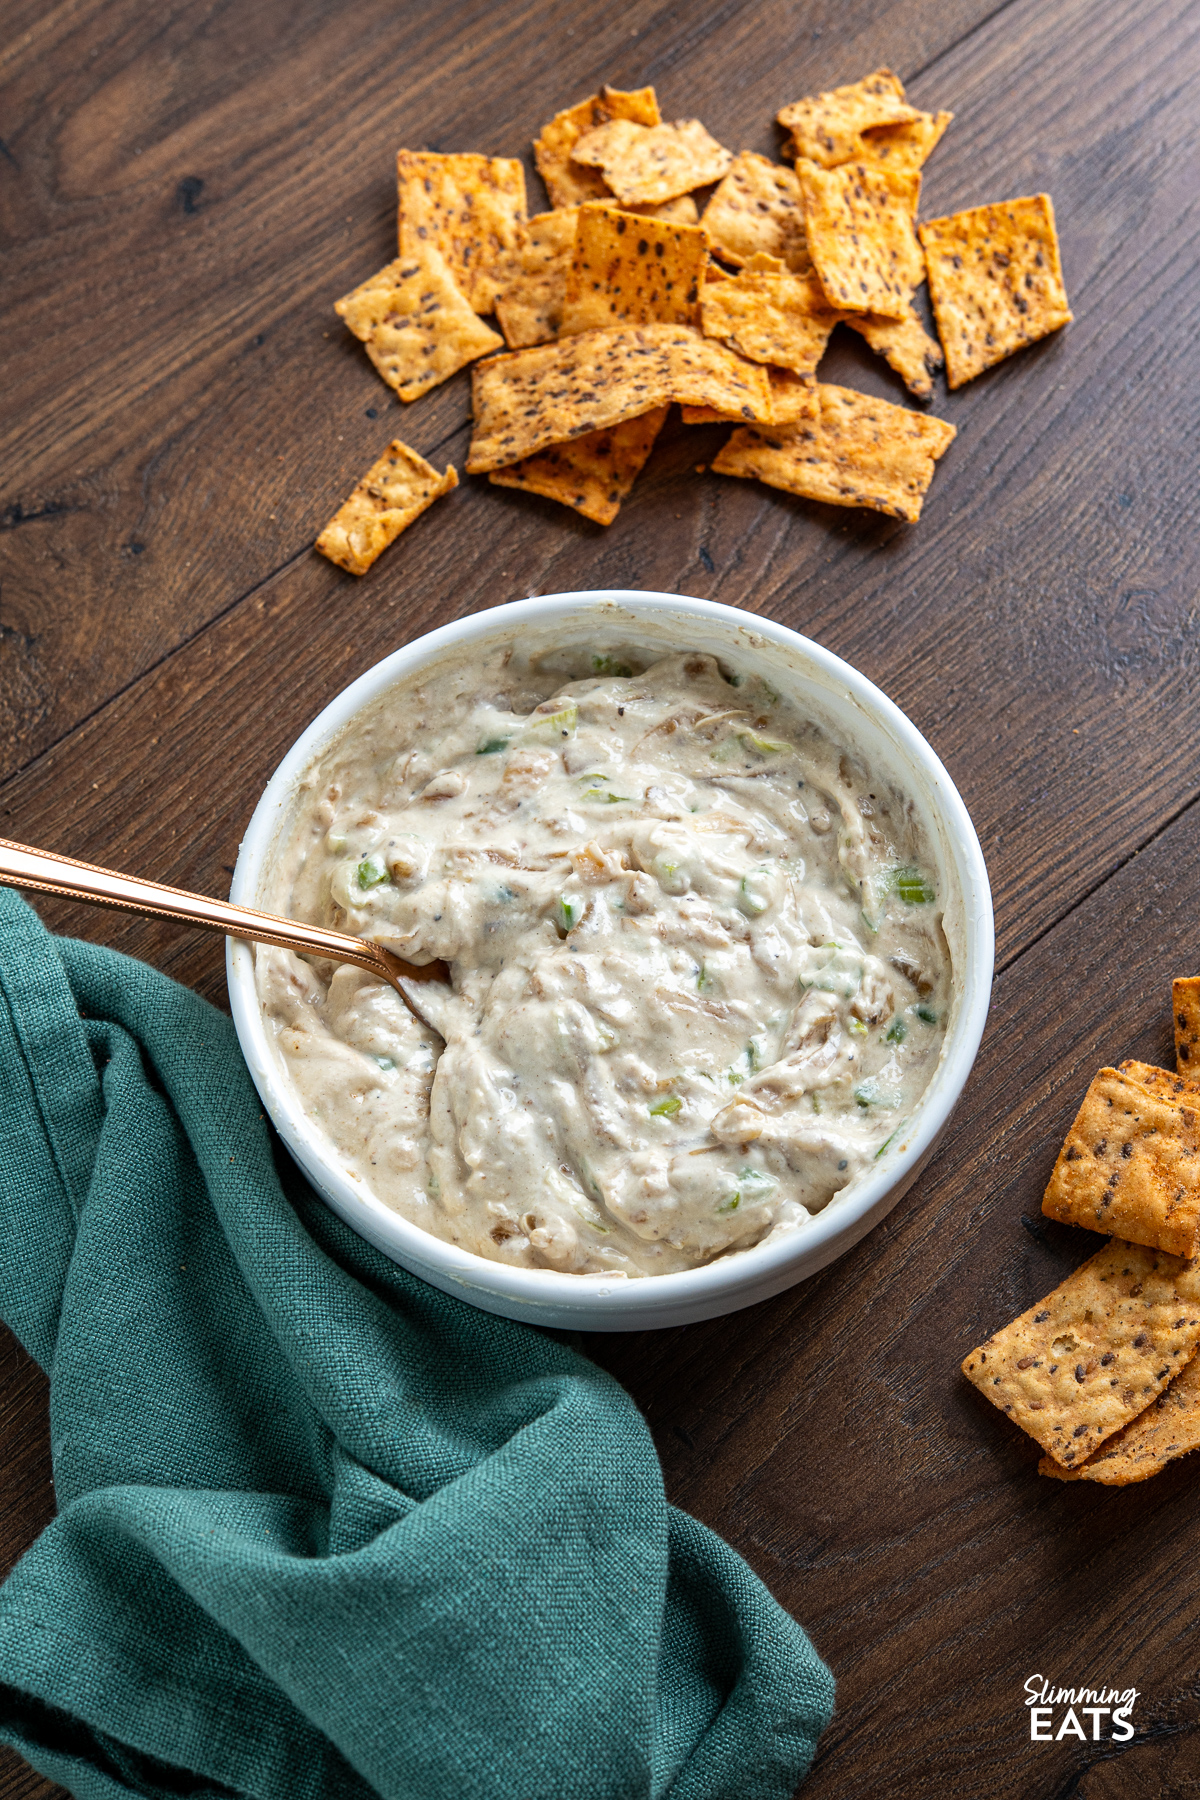 White bowl filled with creamy caramelized onion dip, garnished with a spoon, surrounded by scattered multigrain chips on wooden board